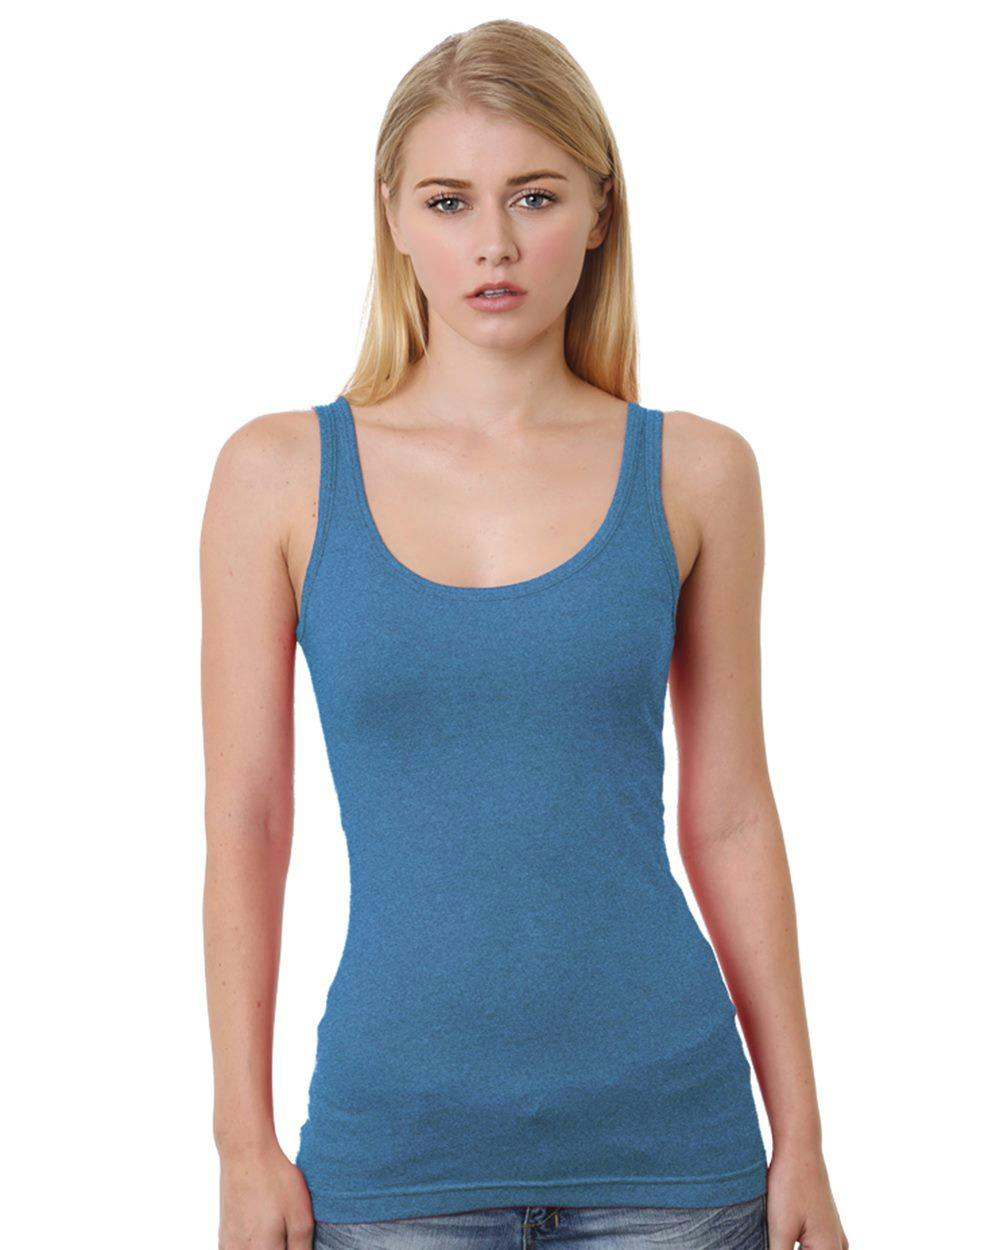 Image for Women's USA-Made Tank Top - 3410